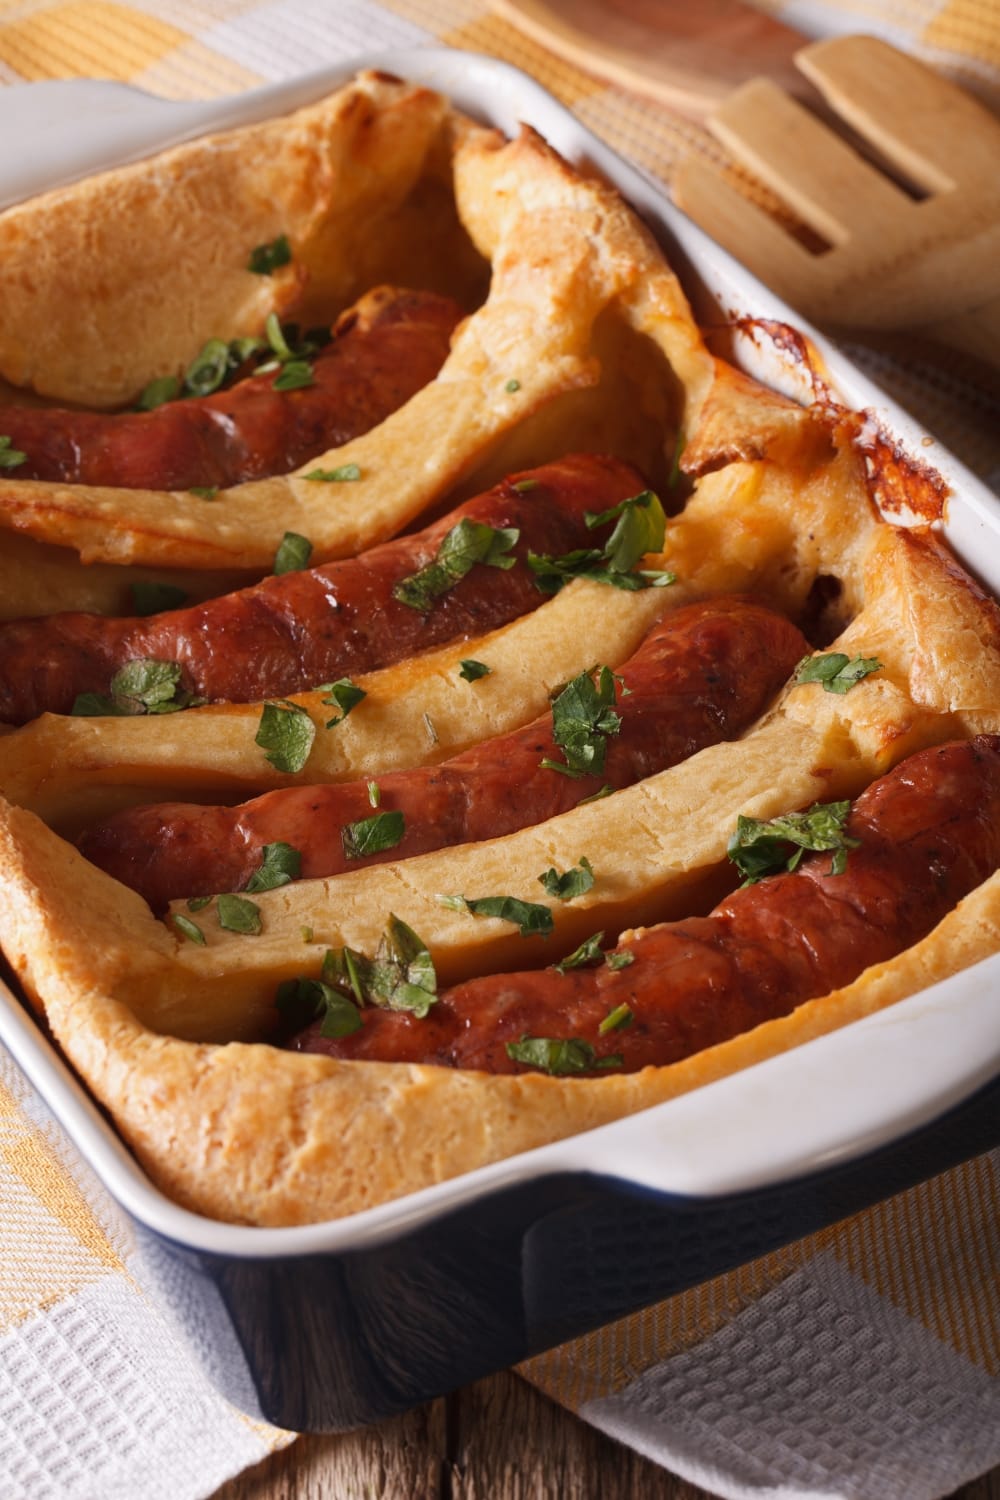 Toad in a Hole on a  Baking Dish Made With Dough and Sausage, Garnished With Chopped Herbs